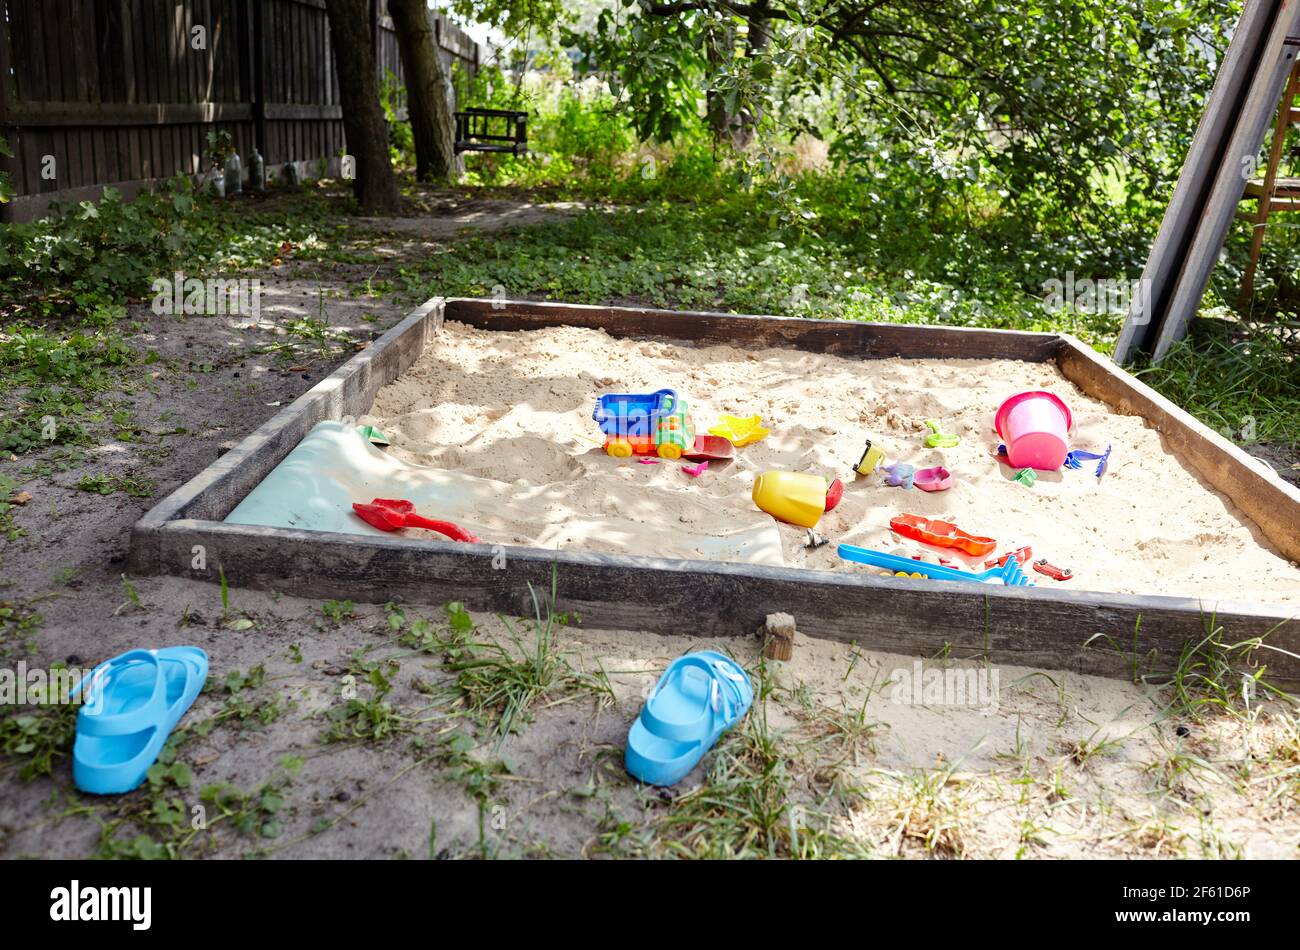 Sandbox outdoor. Children's wooden sandbox with various toys for the game. Summer concept Stock Photo